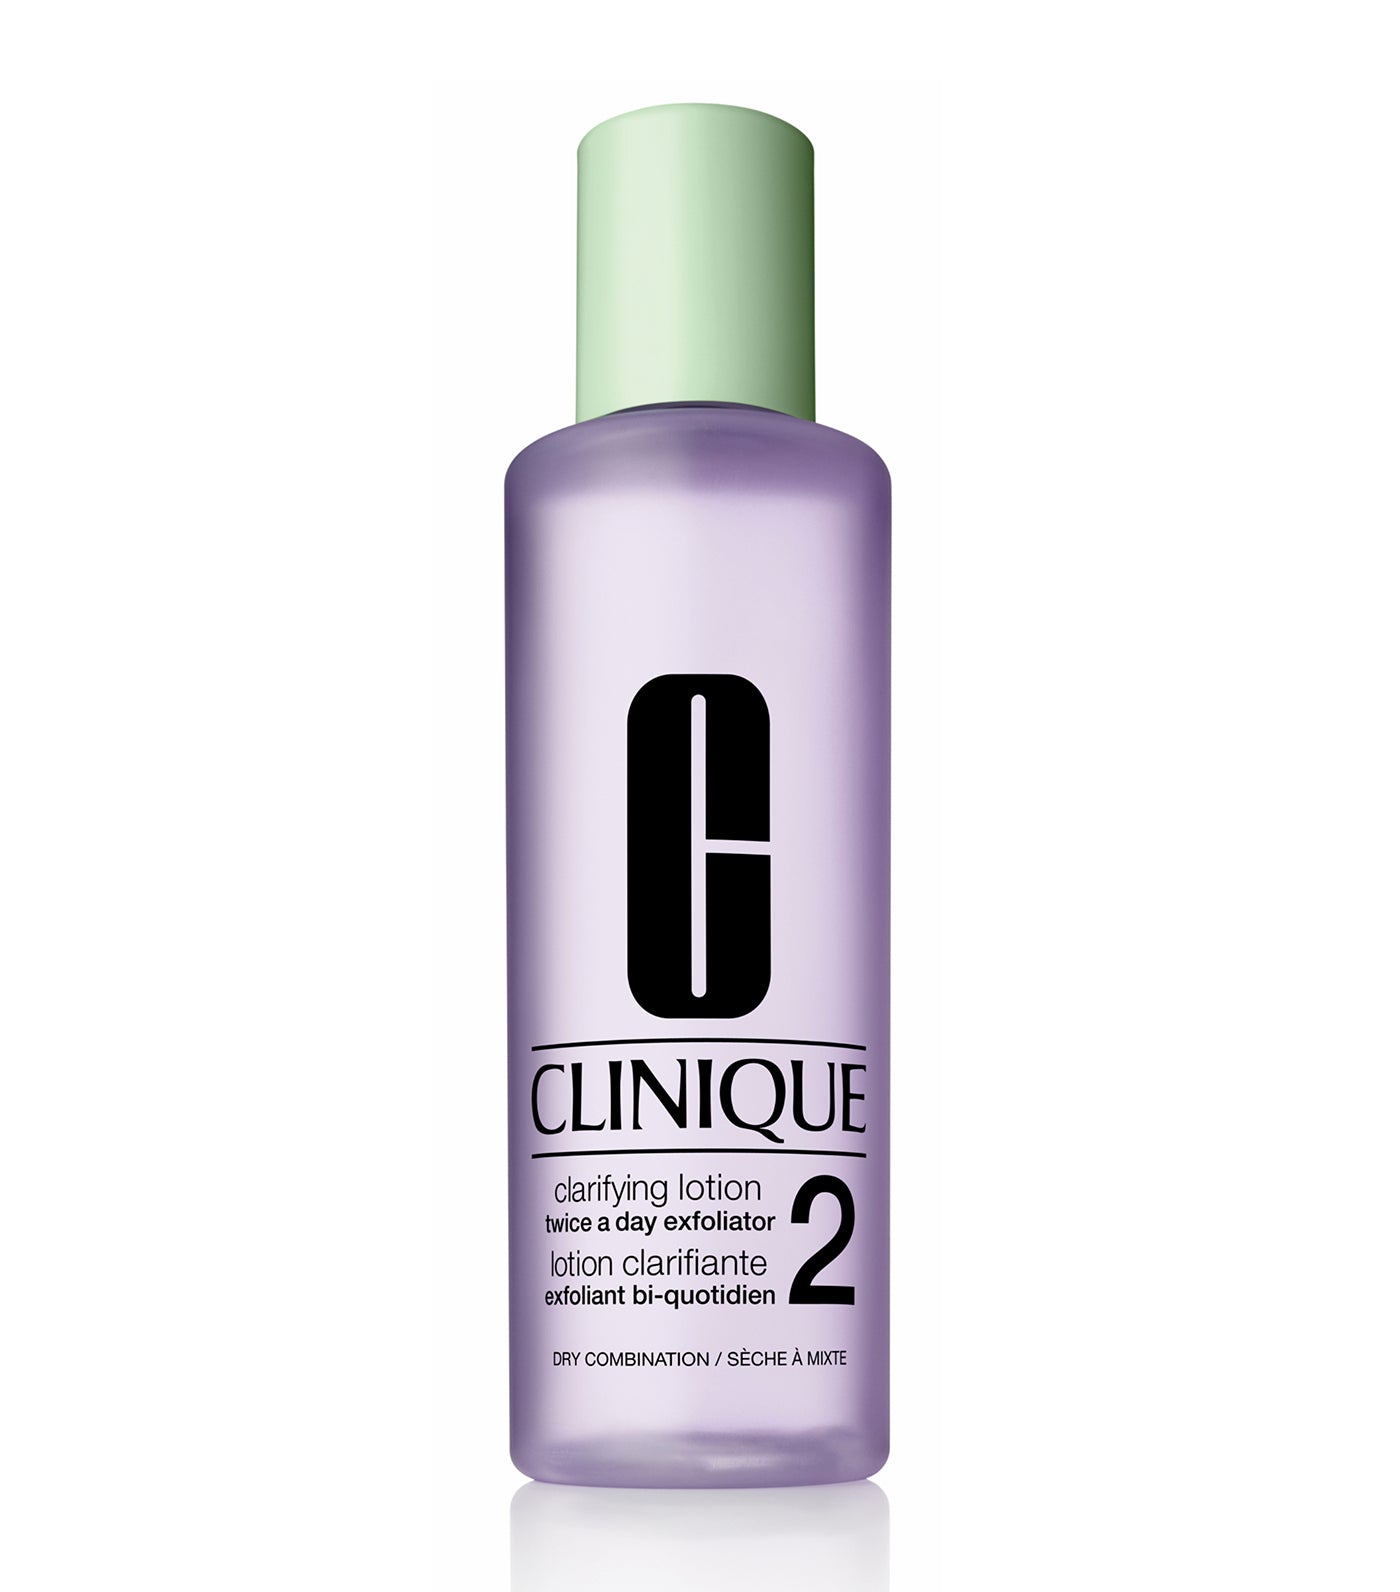 clinique skin type 2 clarifying lotion 1.0 twice a day exfoliator